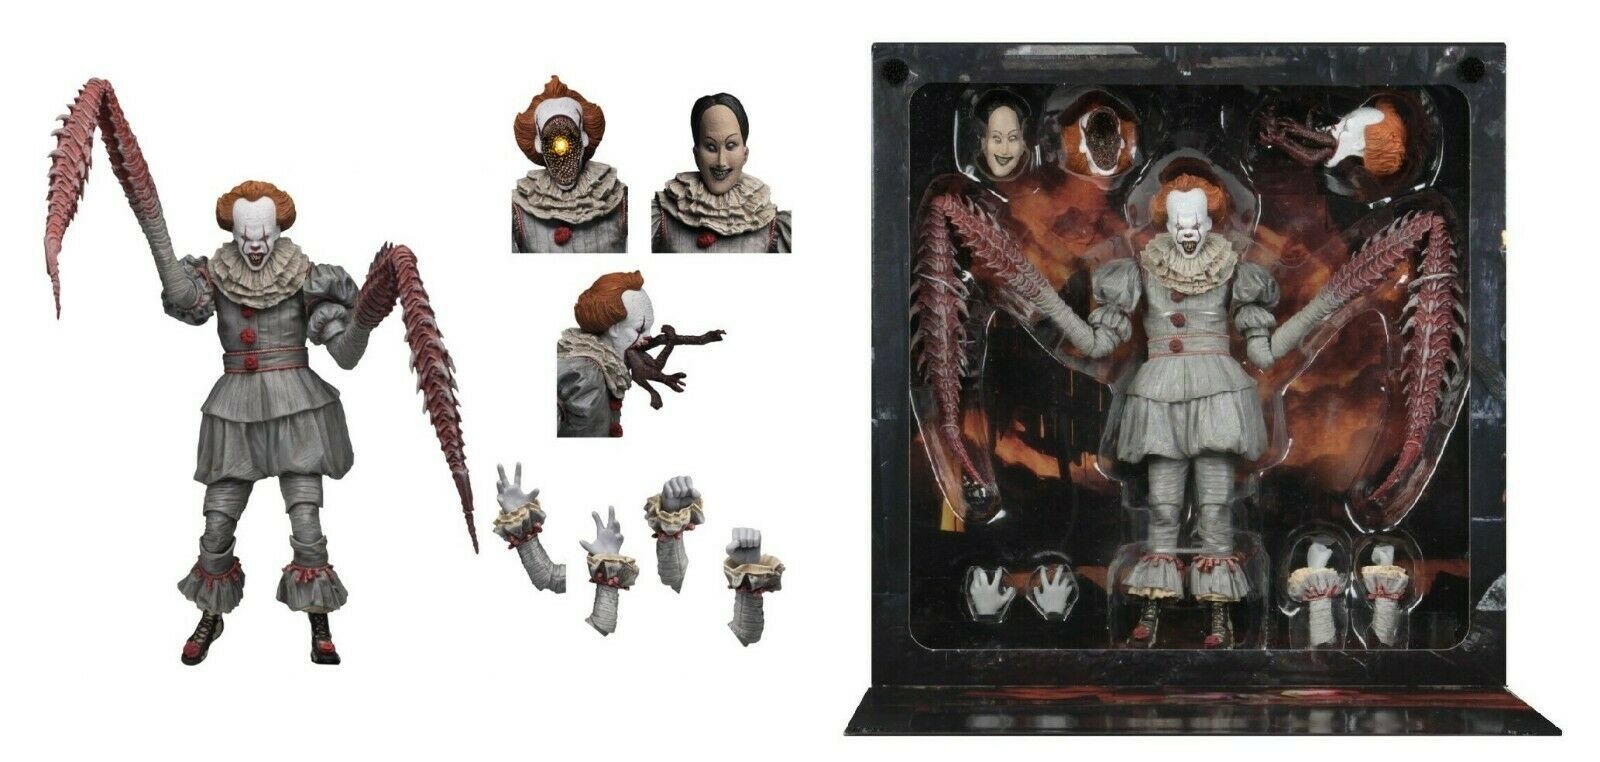 NECA It Pennywise 2017 Version 18cm Action Figure for sale online 